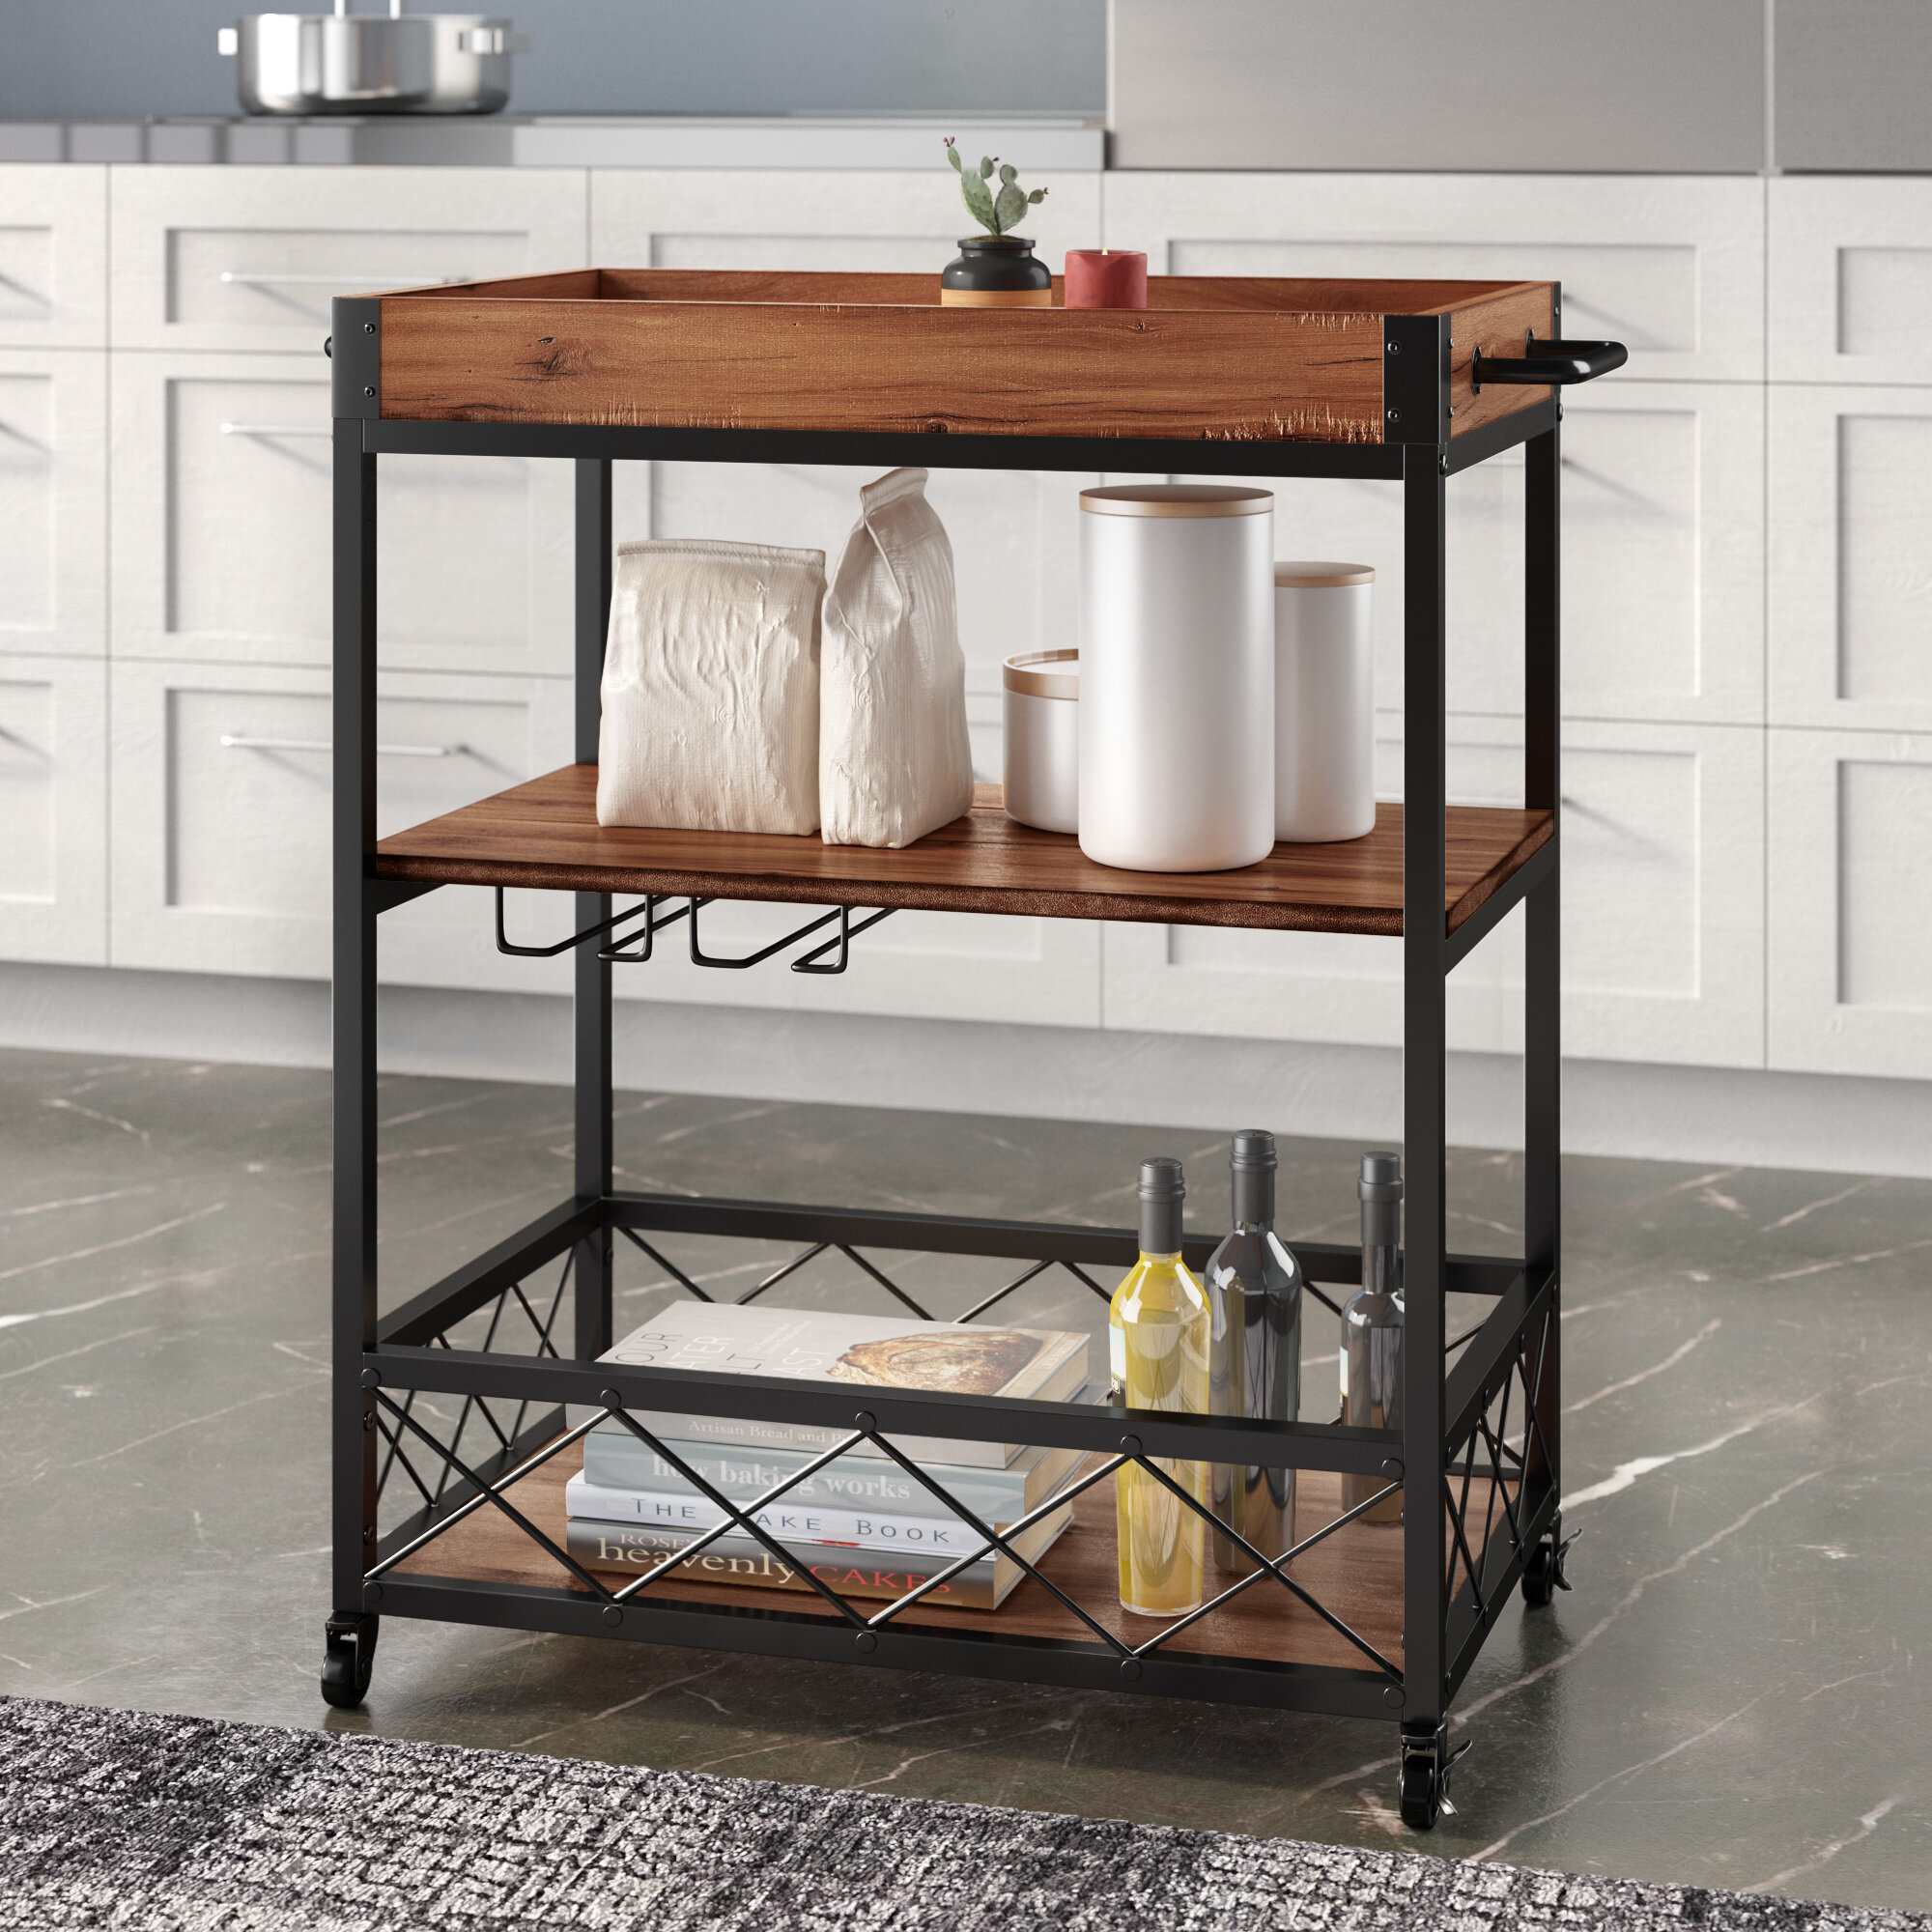 3 Tier Rolling Kitchen Trolley Cart Serving Dining Storage Shelf W/Removable Top 